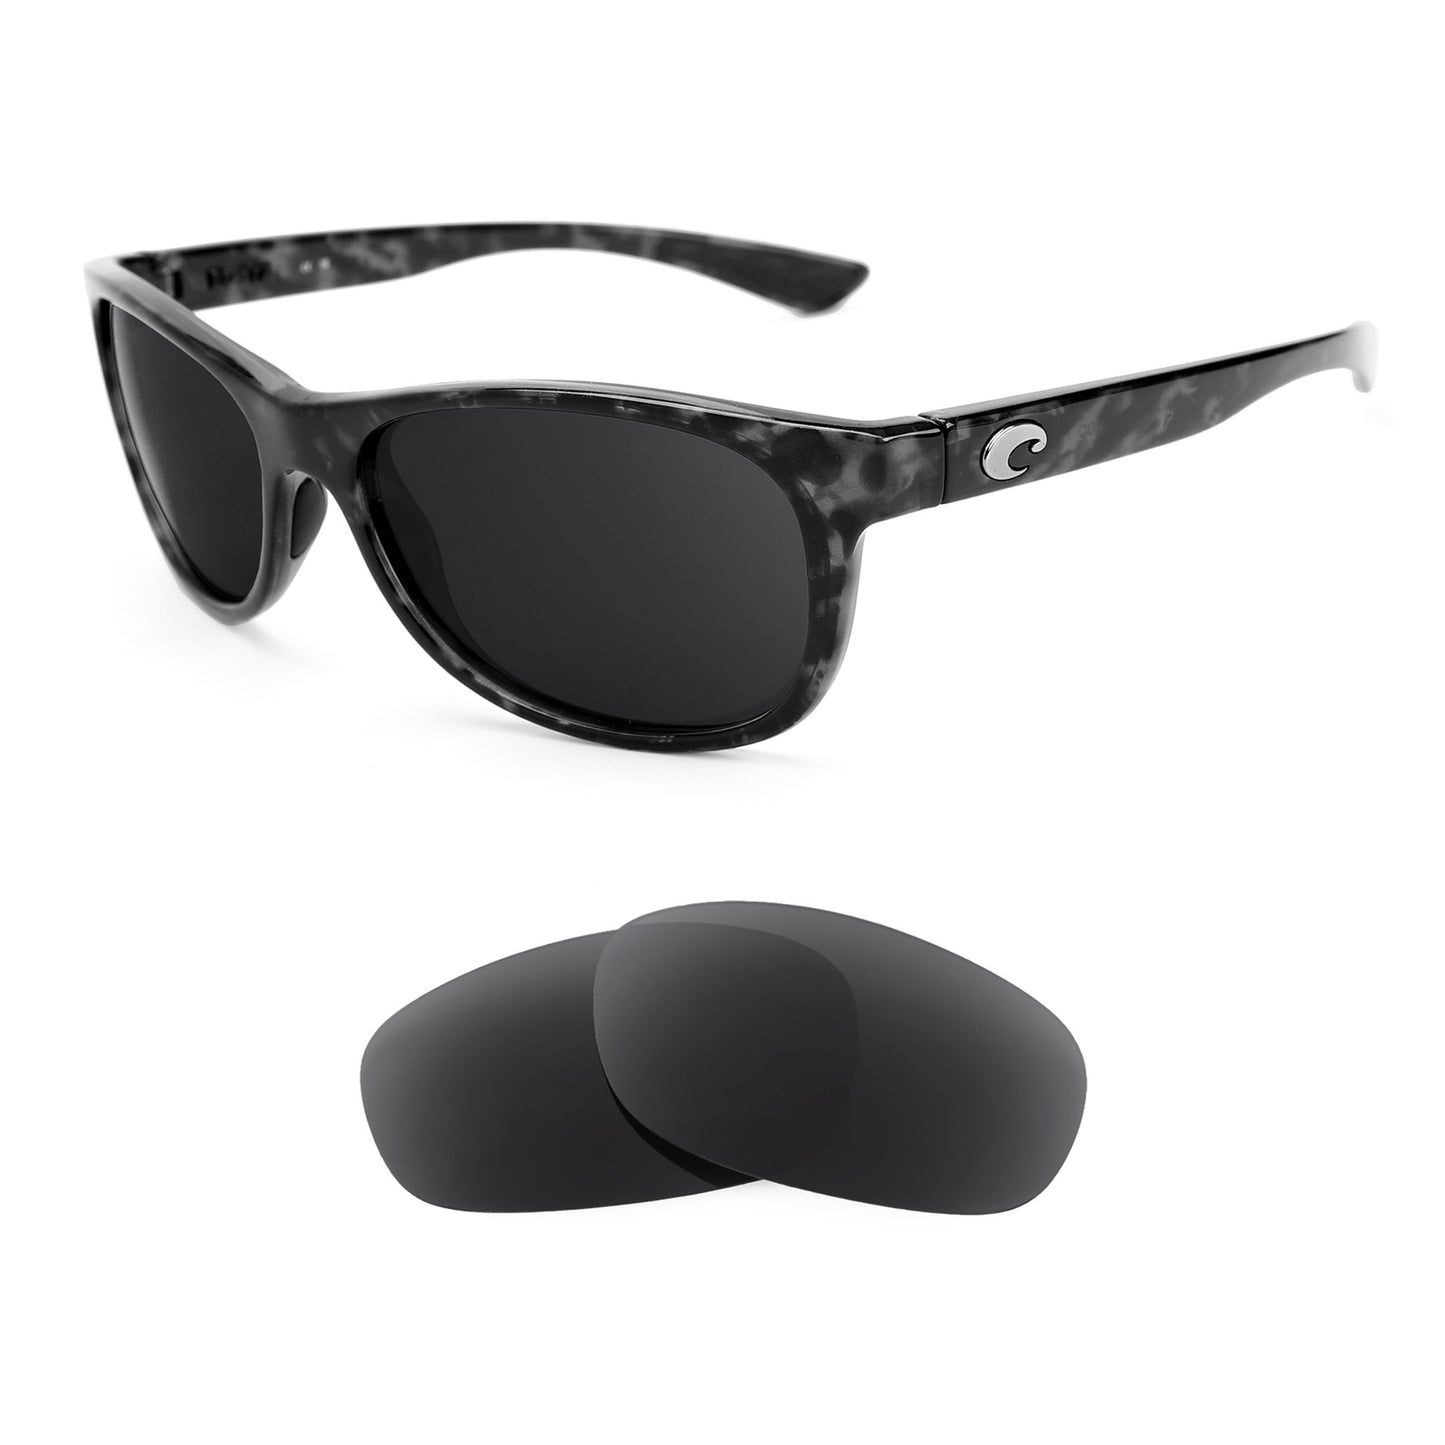 Costa Prop sunglasses with replacement lenses